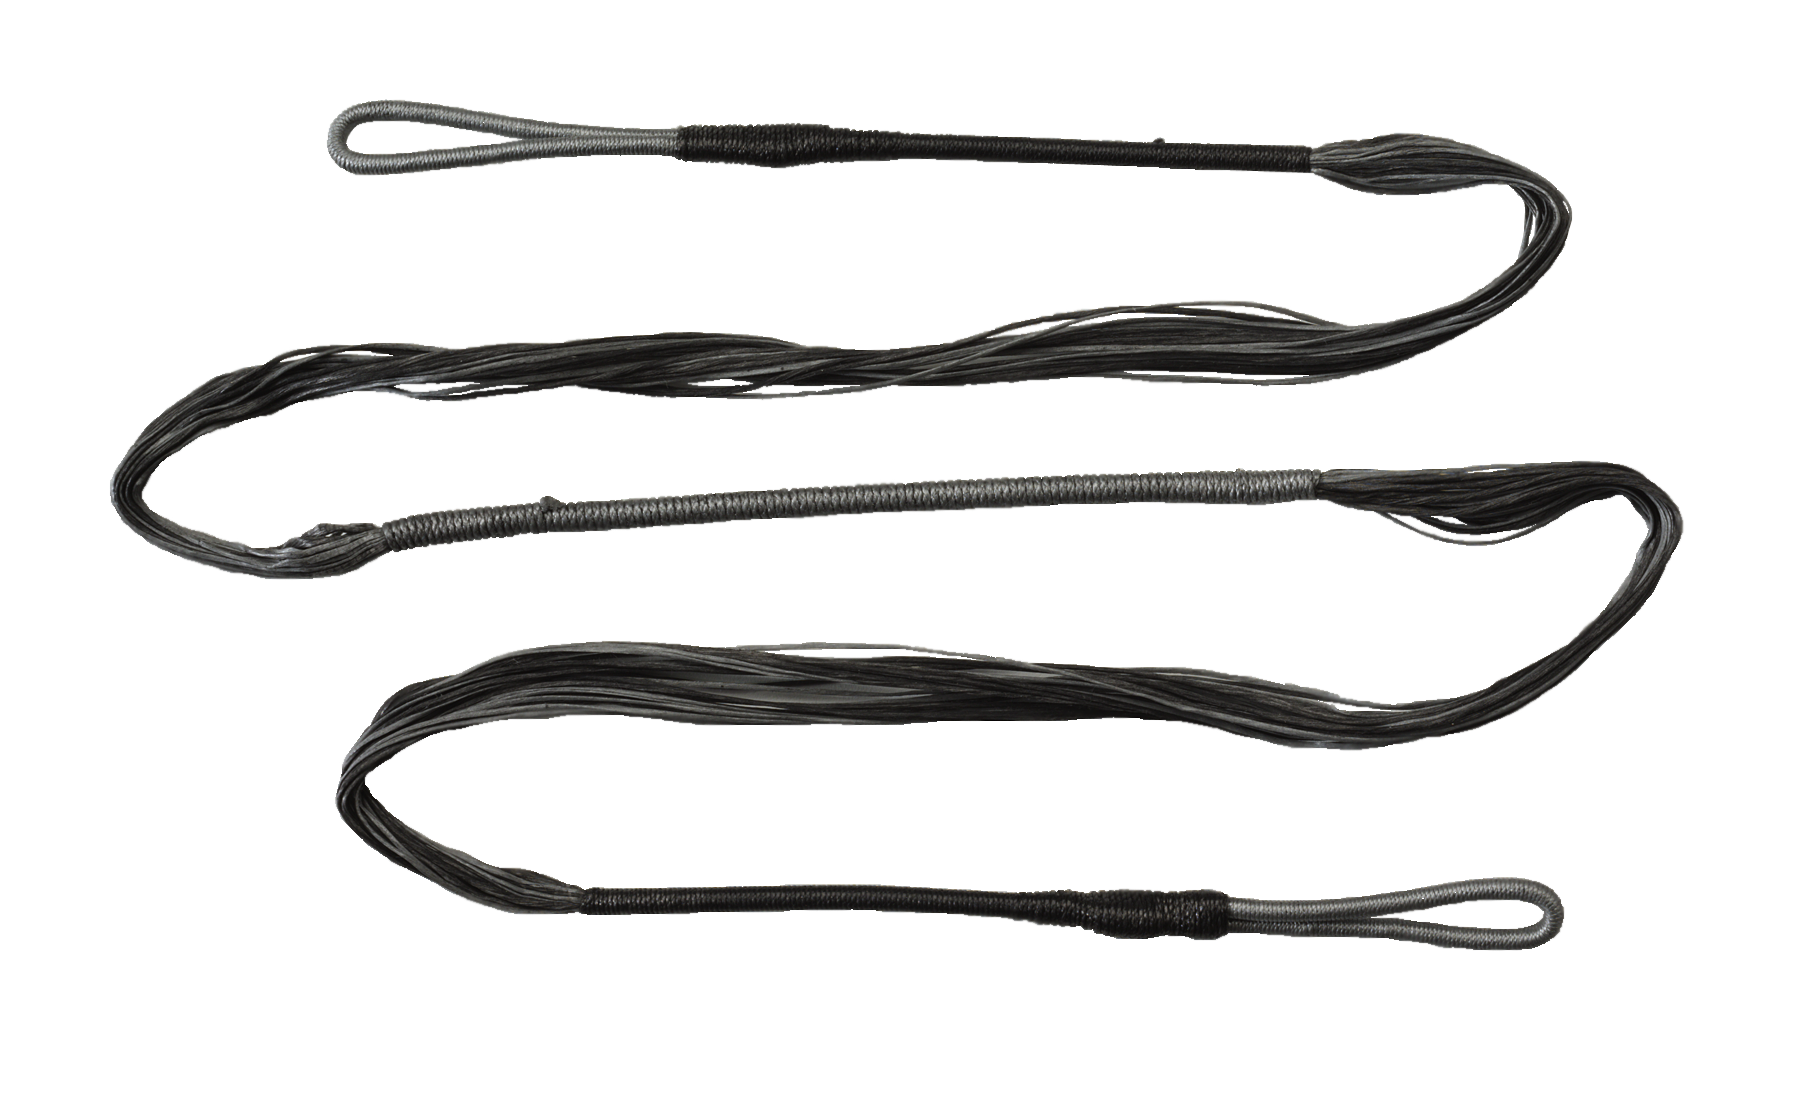 Excalibur Excel Crossbow String